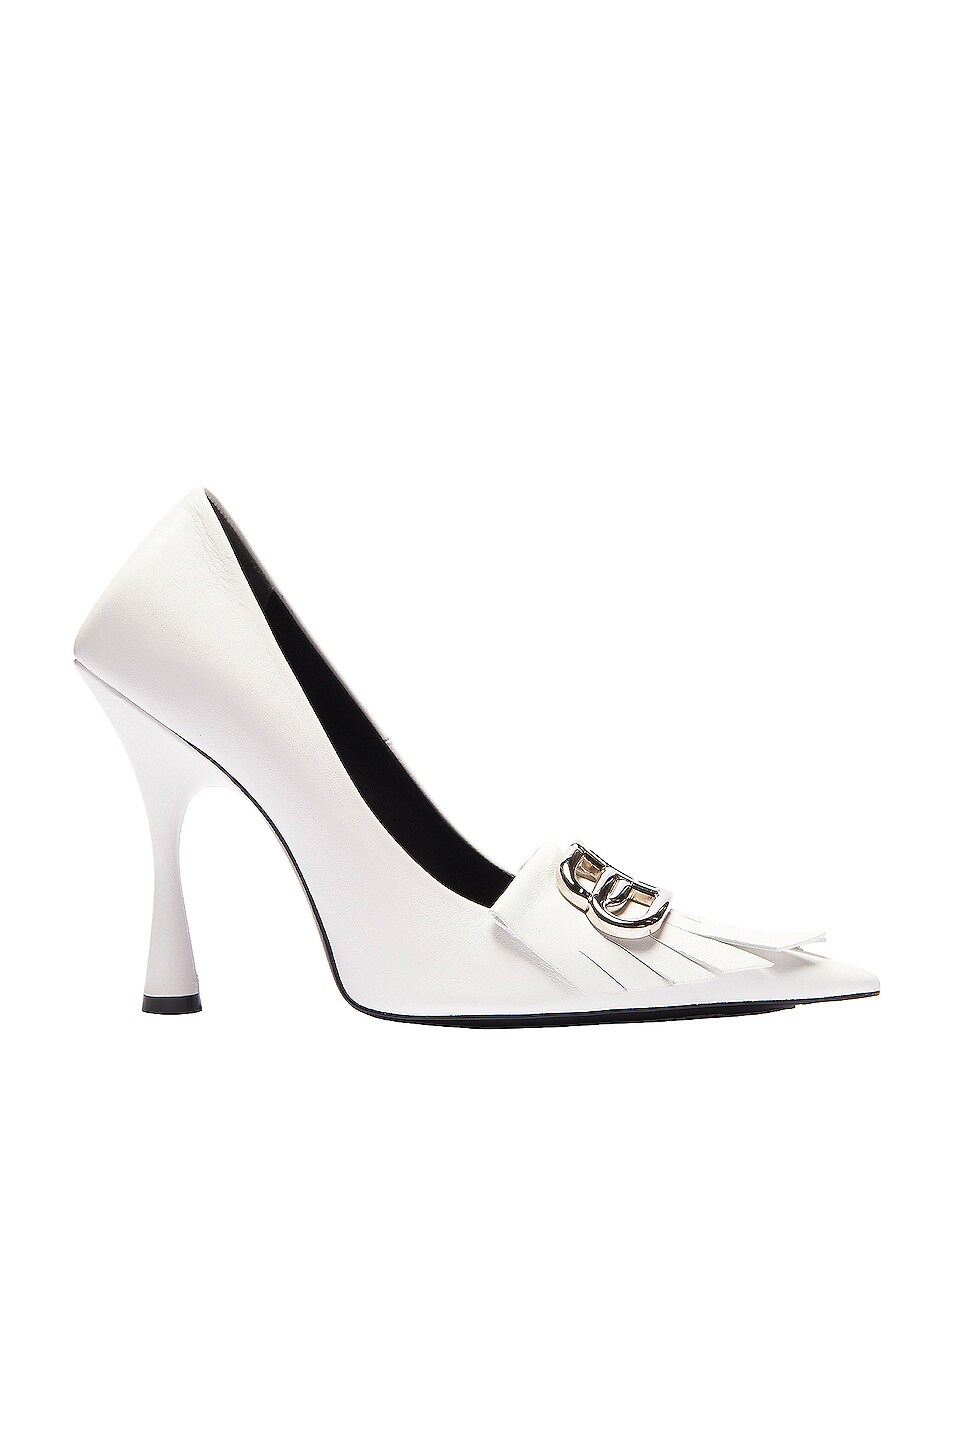 Image 1 of Balenciaga Fringe Knife Pumps in White & Silver